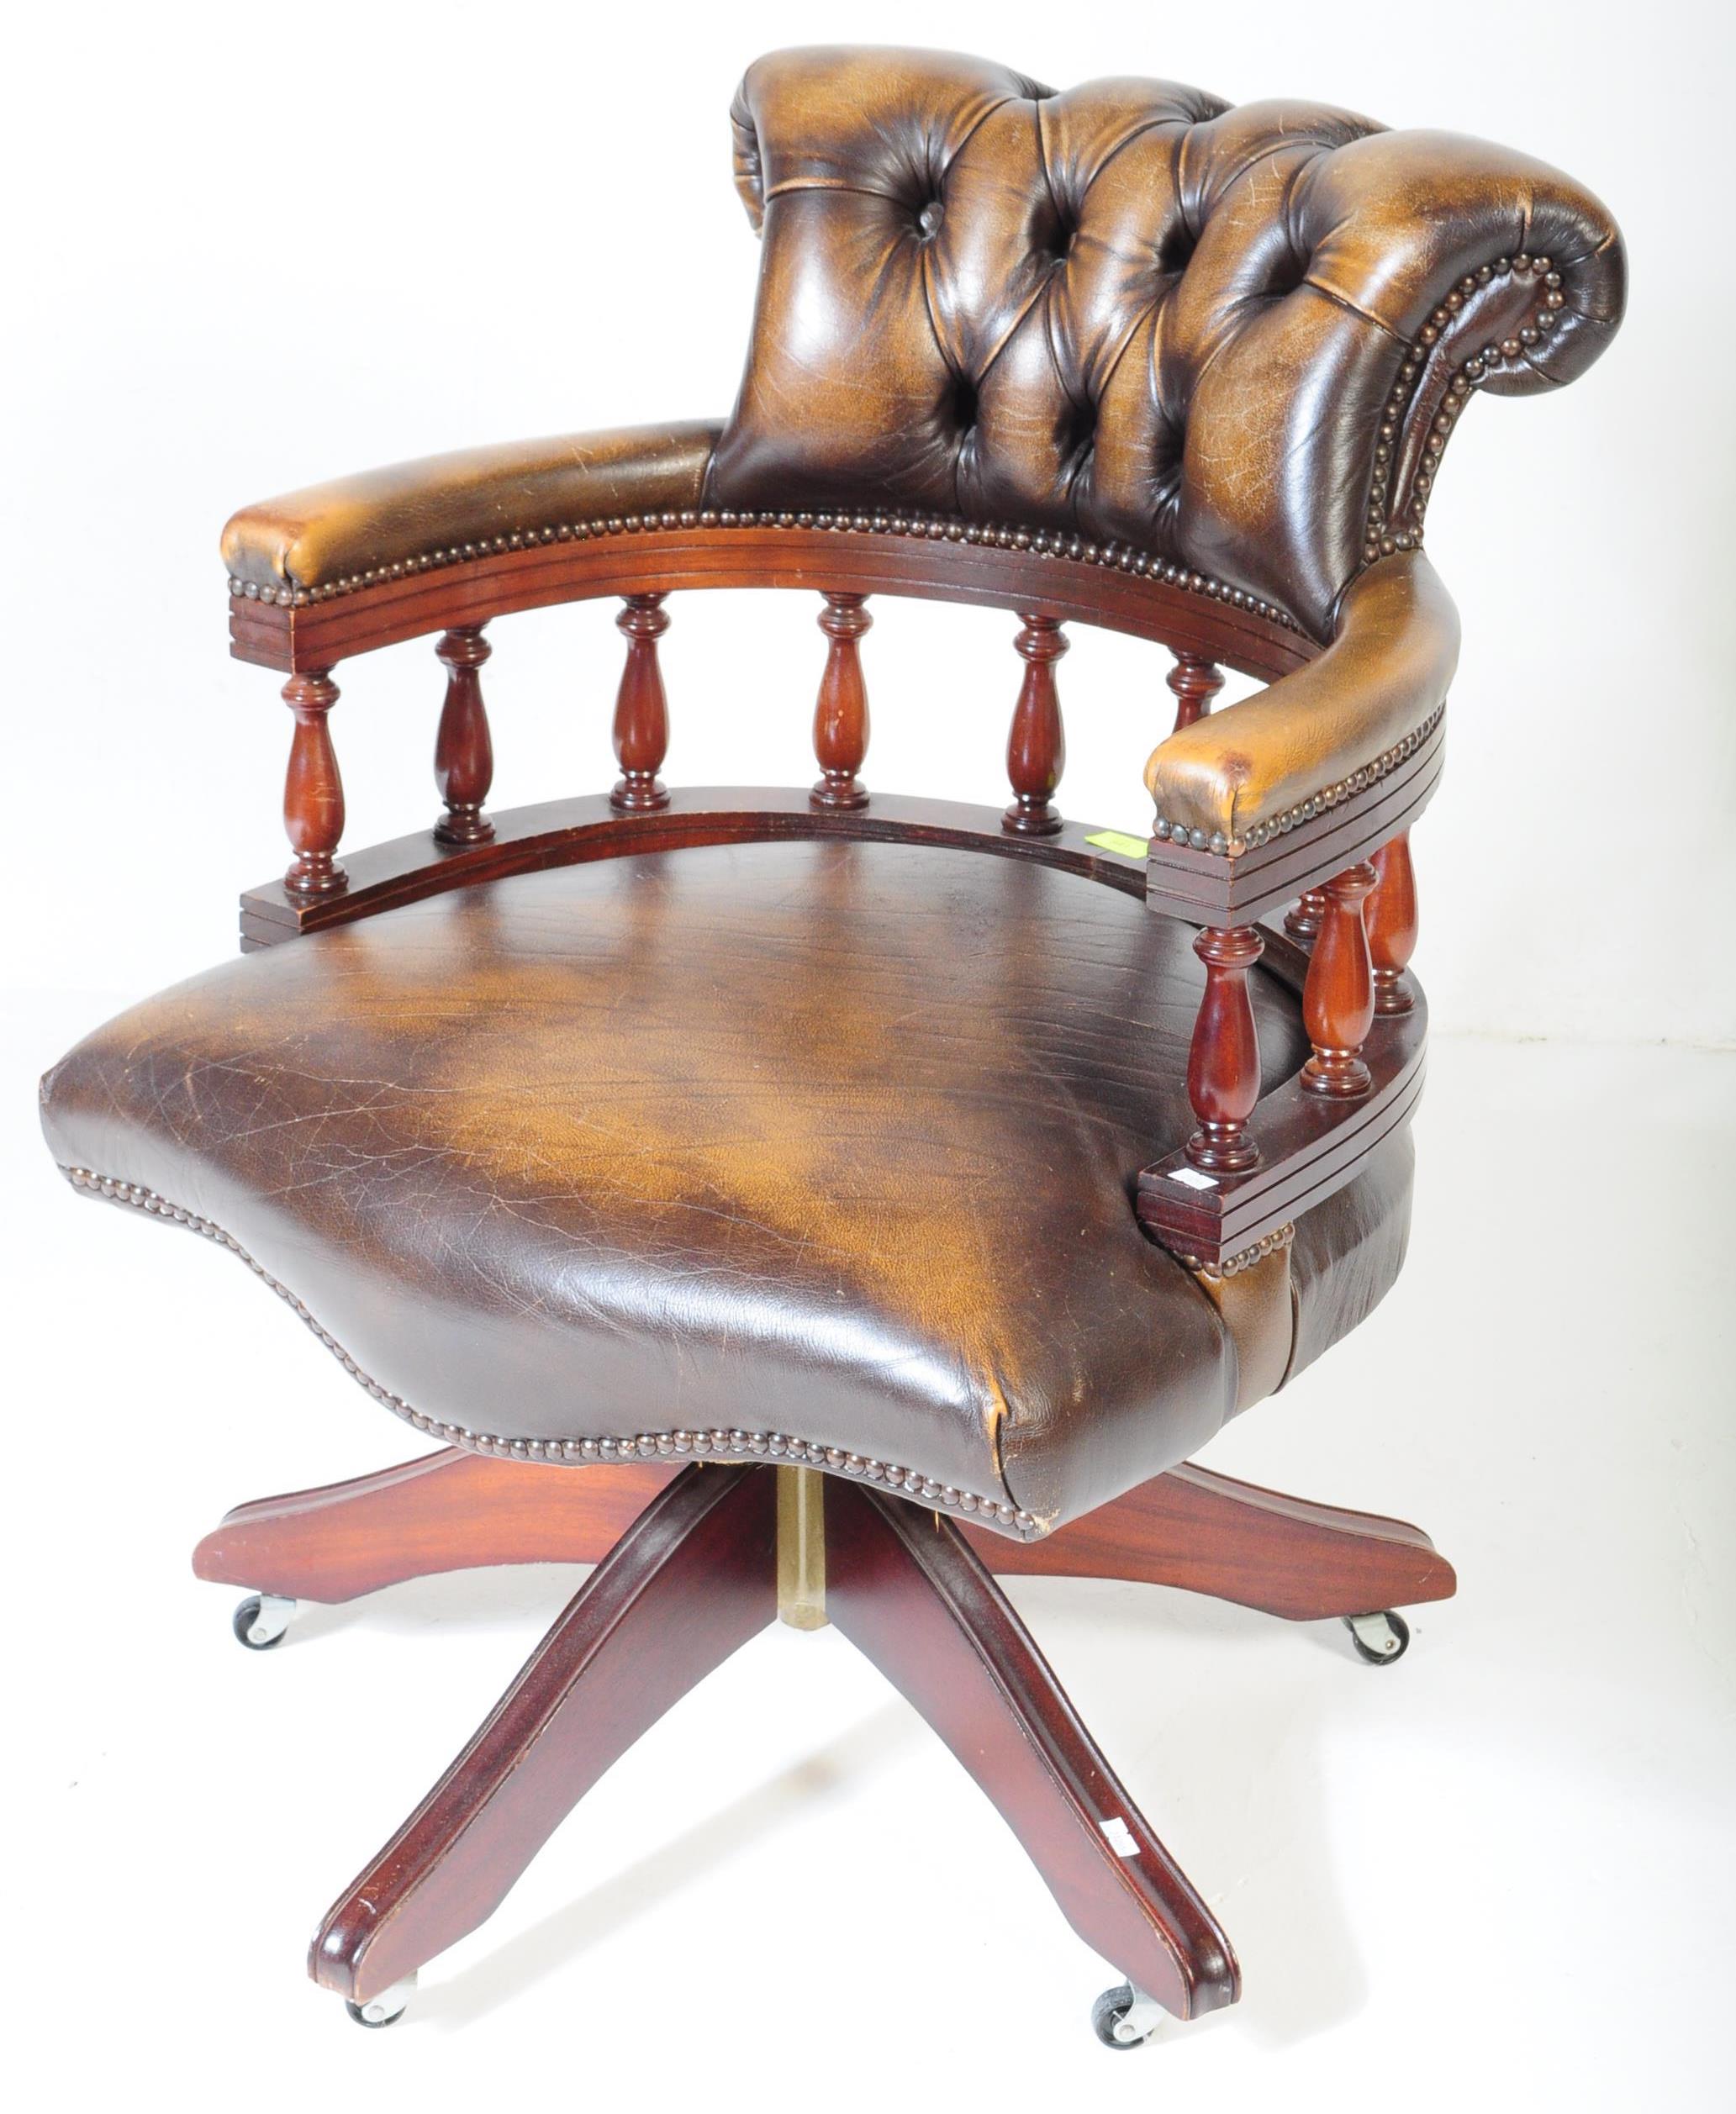 LATE 20TH CENTURY CAPTAINS OFFICE CHAIR BY MEKANIKK OF FINLAND - Image 2 of 6